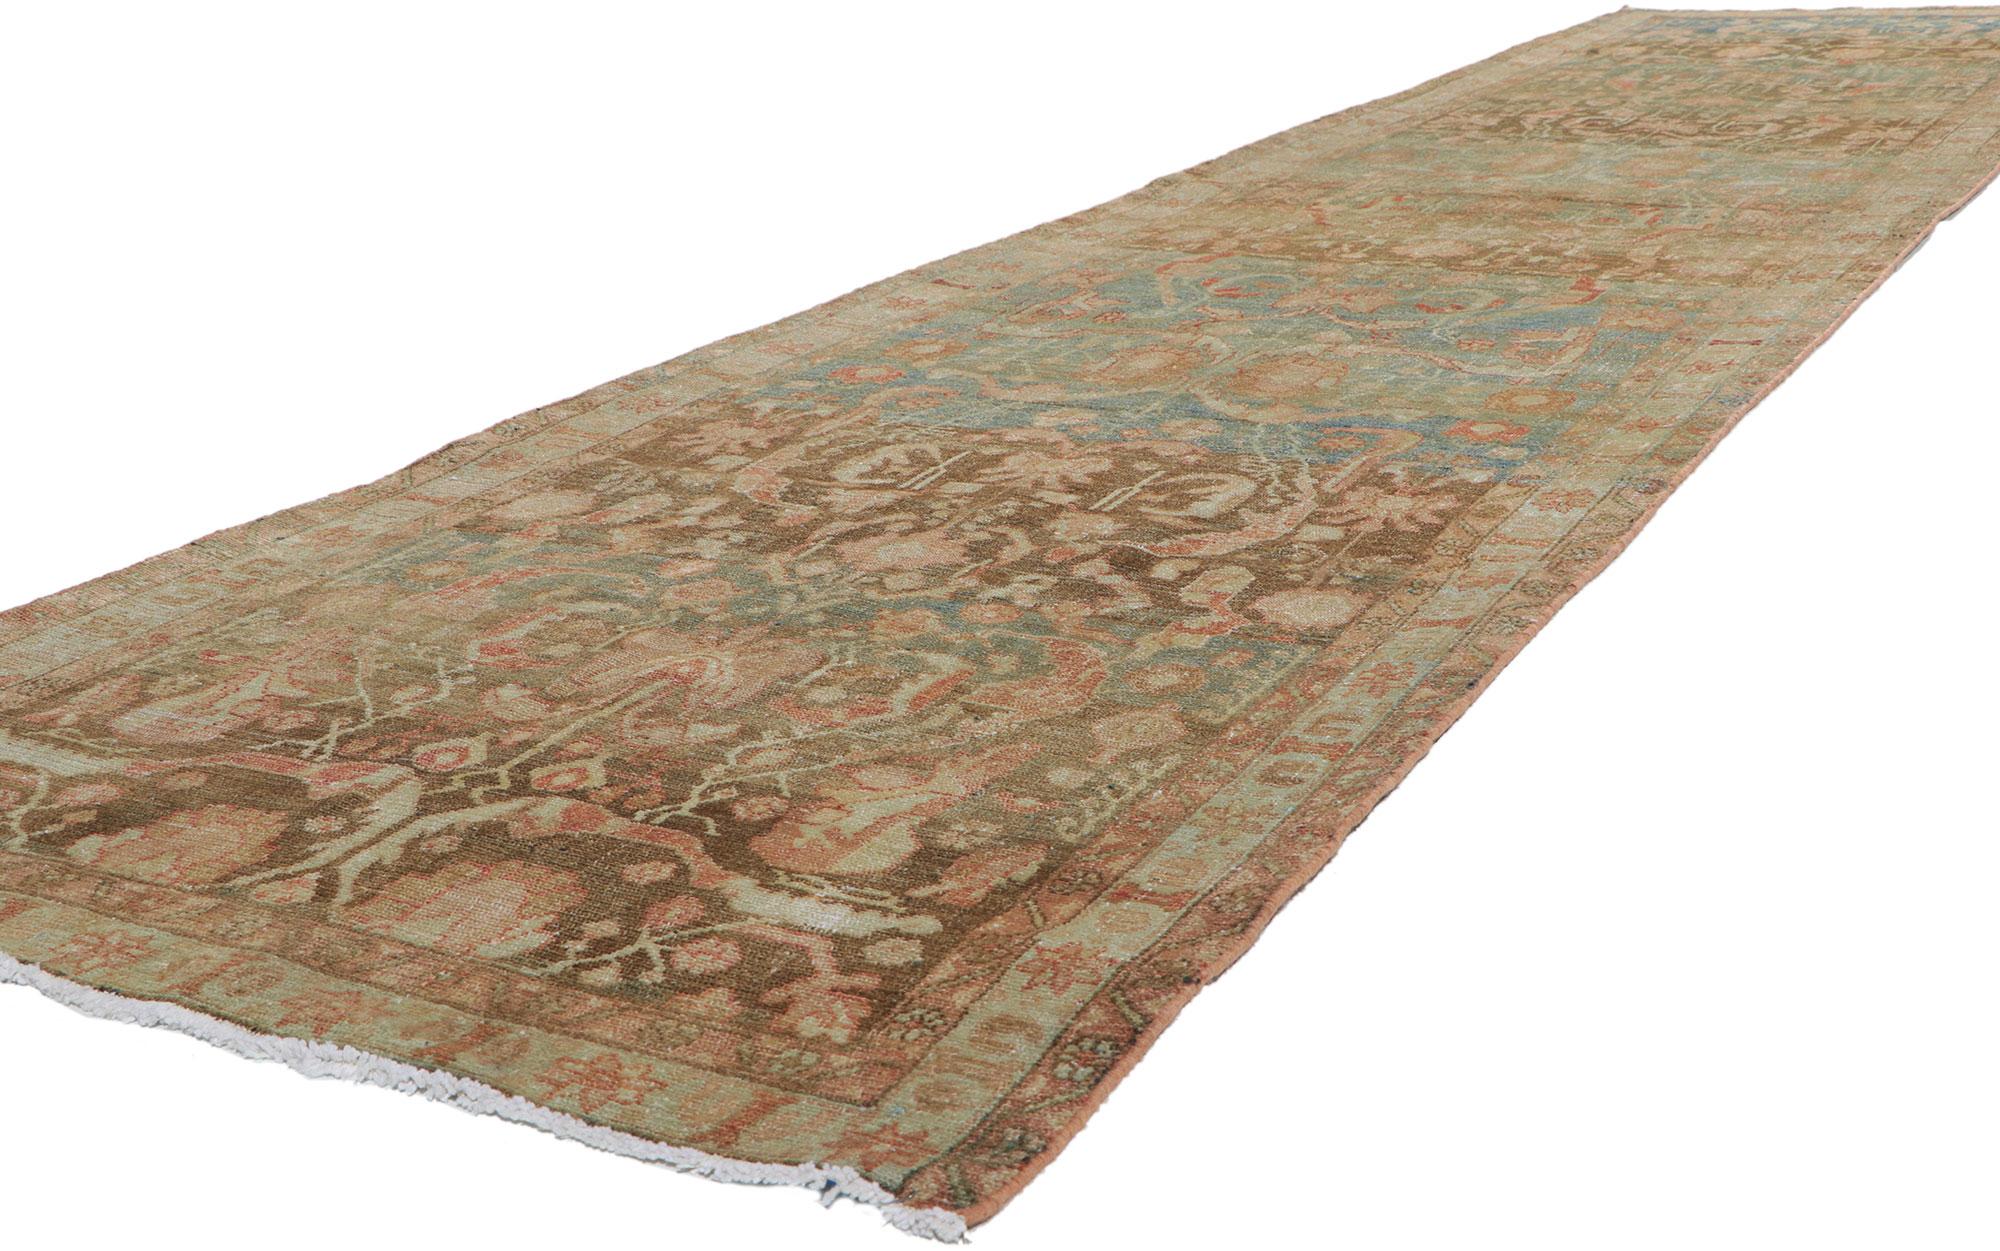 61039 Distressed Antique Persian Malayer Rug, 03'05 x 15'09. Behold the allure of this hand-knotted wool distressed antique Persian Malayer rug runner – a handmade rug that whispers tales of bygone eras yet waltzes with finesse that could make a